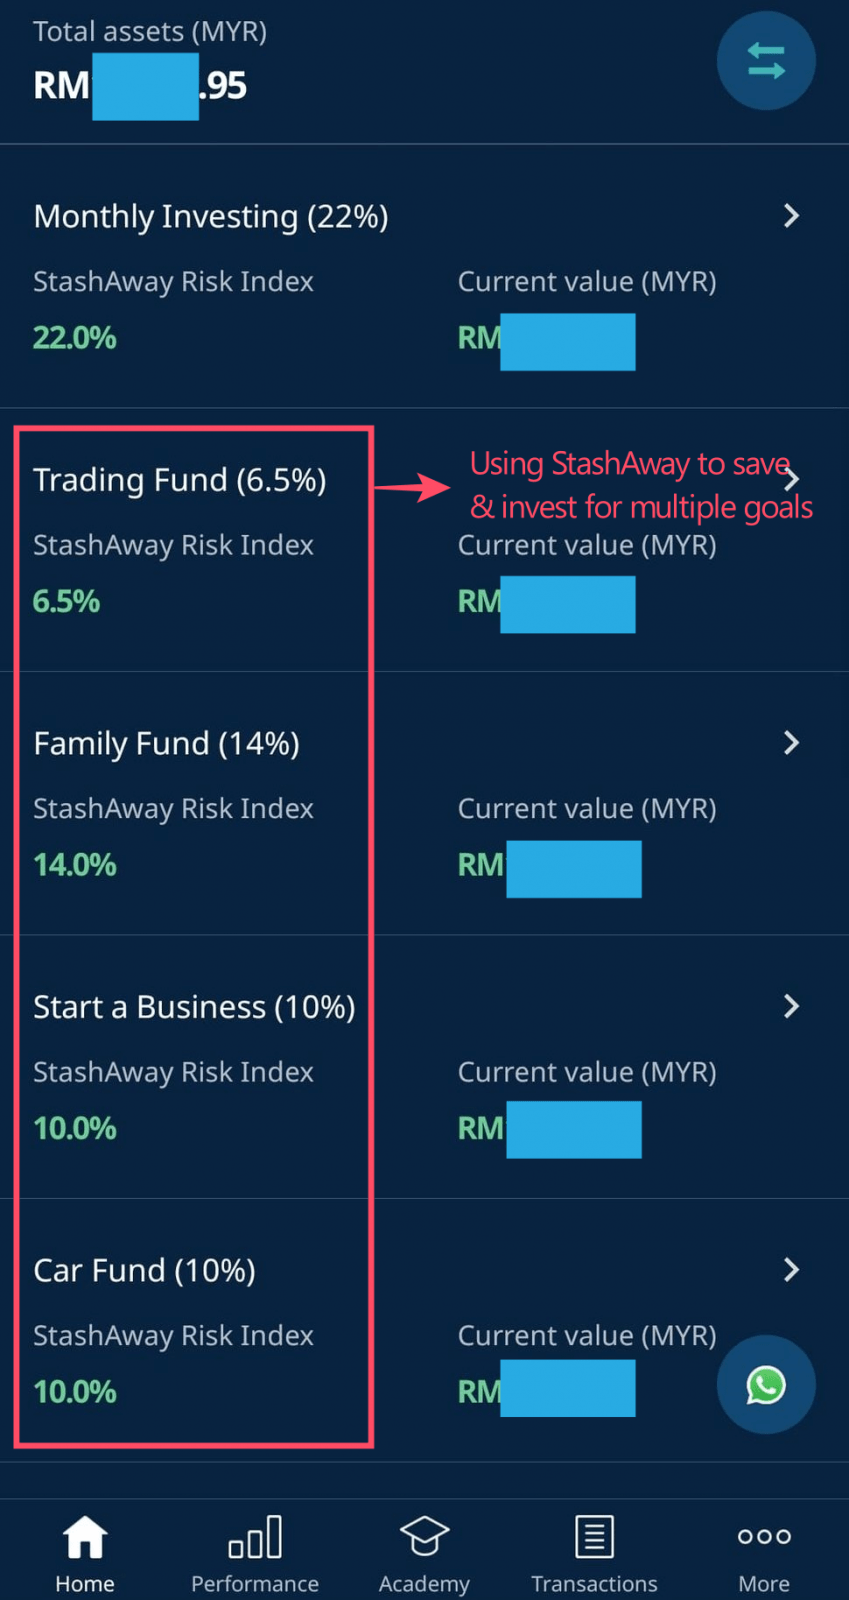 I set up multiple StashAway Portfolio to save/invest for different goals in life.